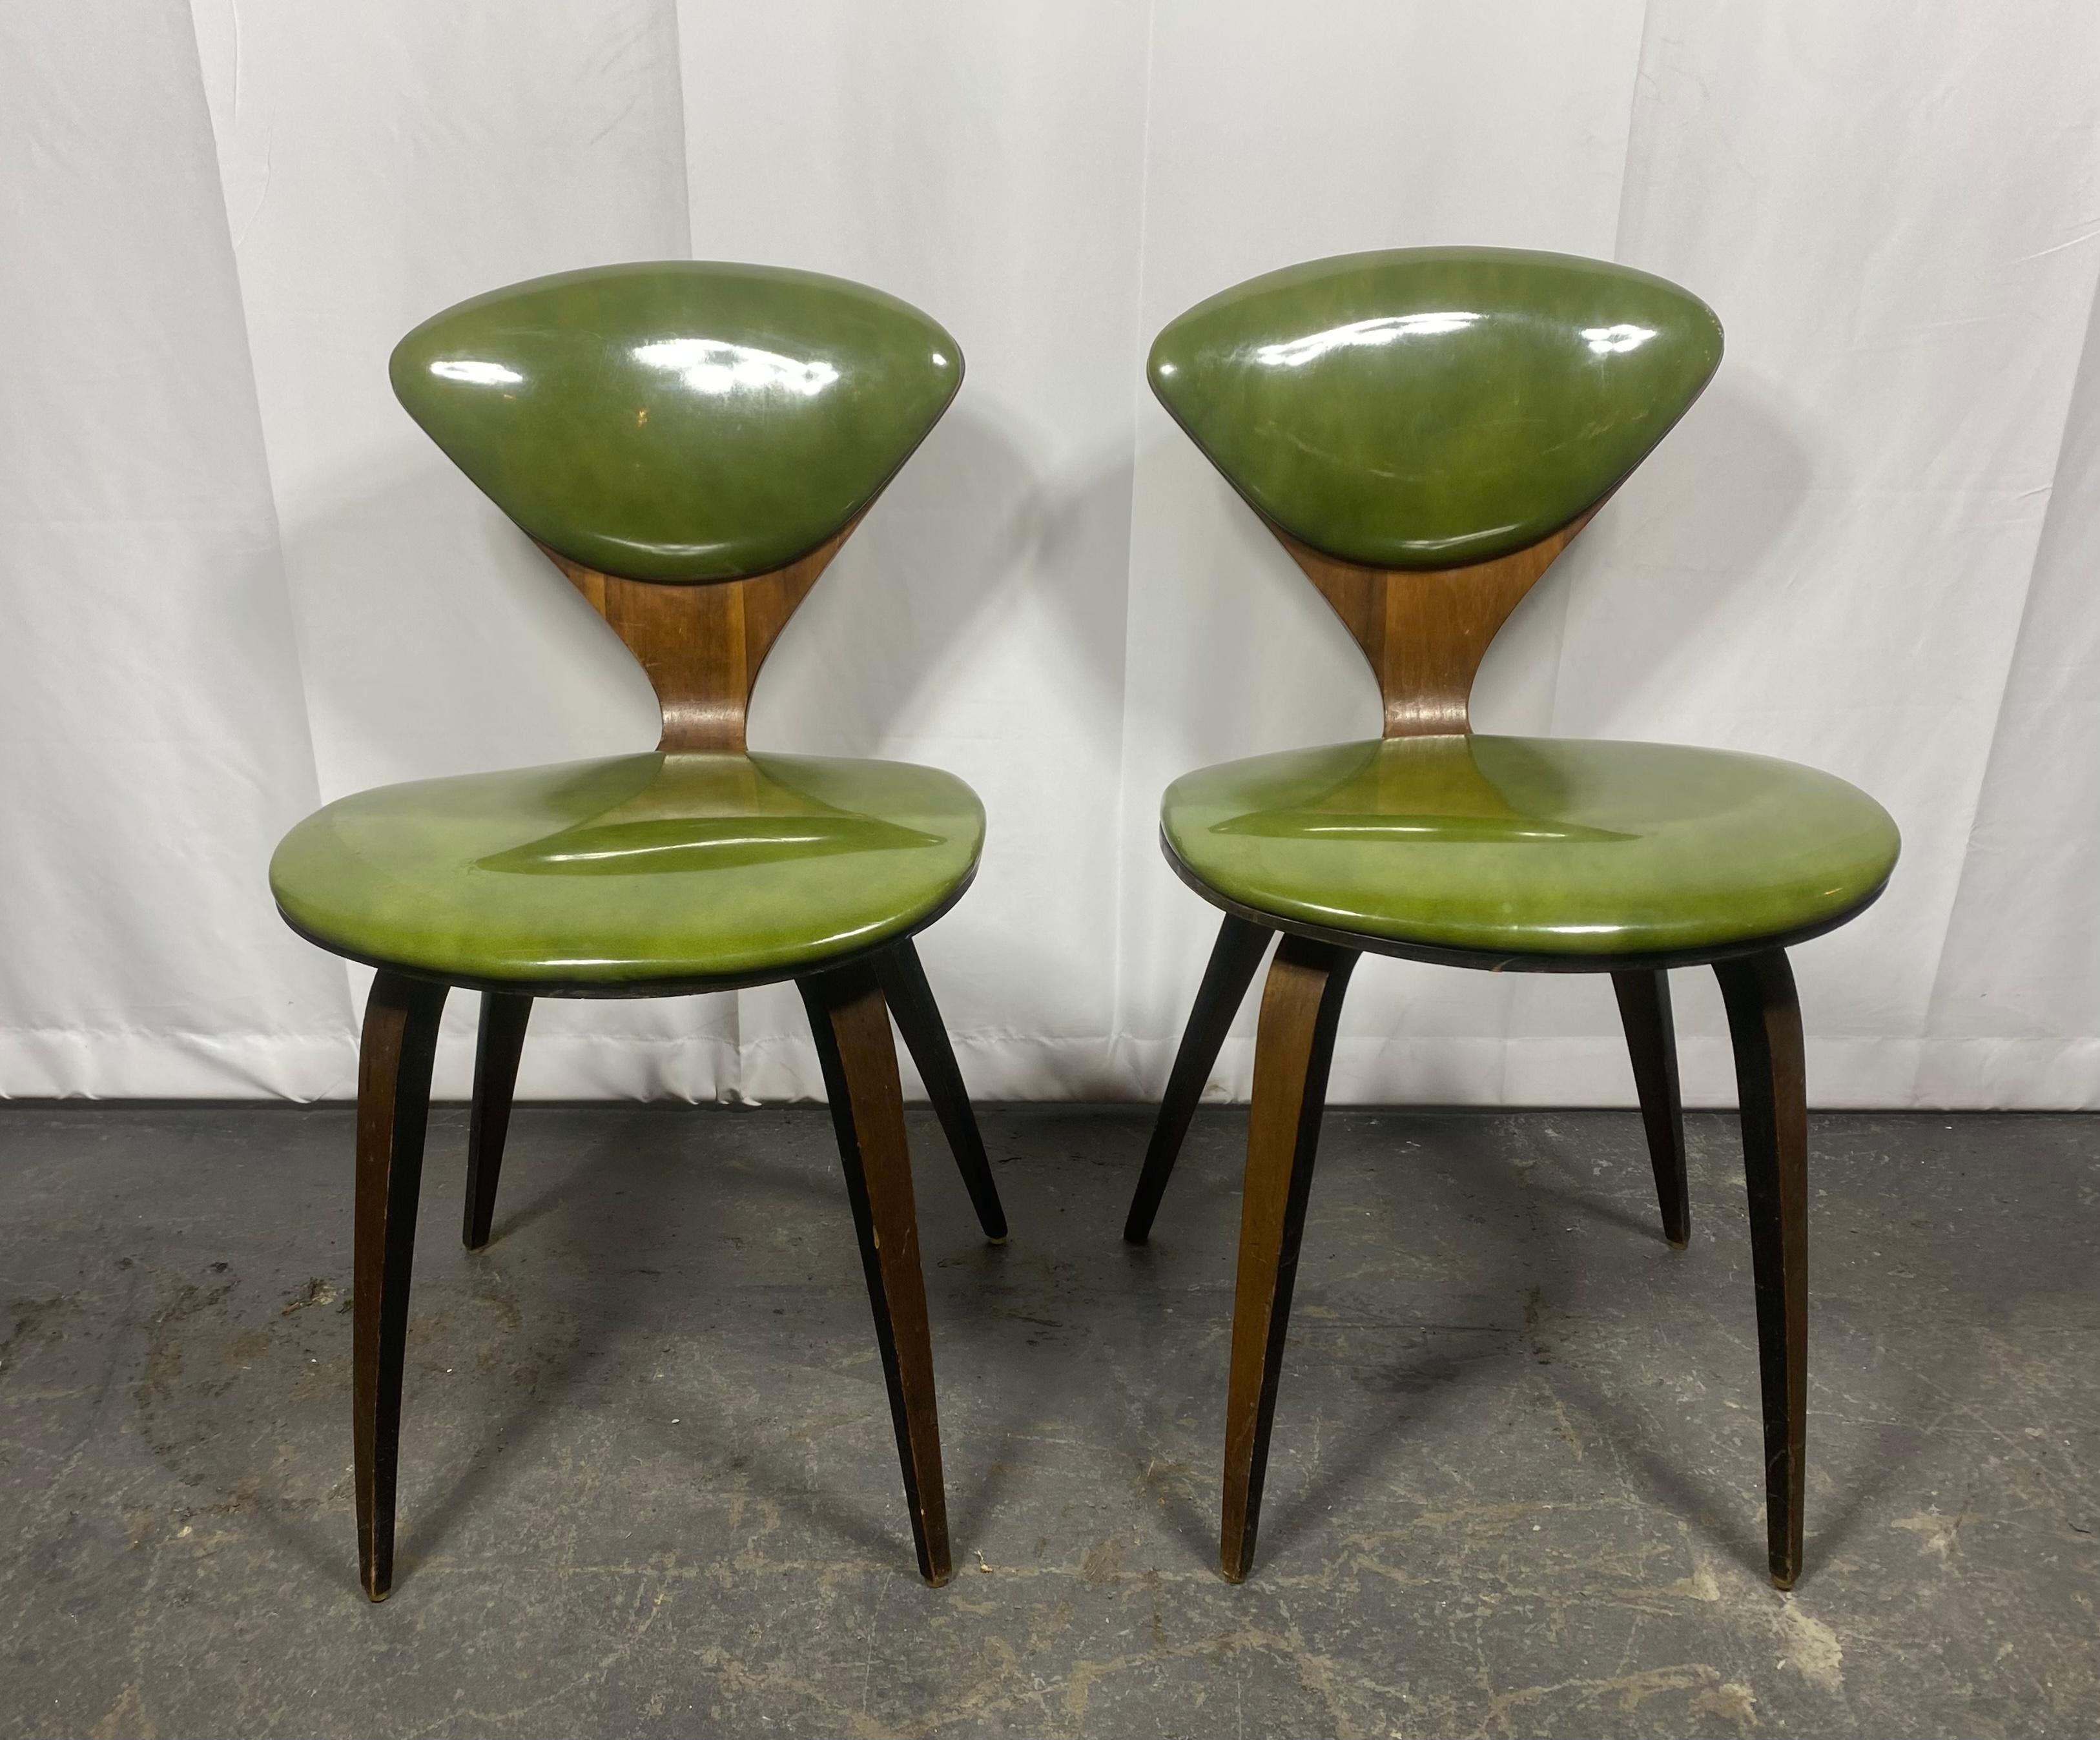 Stunning Norman Cherner dining / desk / side chair in original green patent leather .manufactured by  Plycraft Inc.. Amazing original condition. Retains original labels as well as ink-stamp date,, Price for ONE chair.. Matched pair avail.Dimensions: